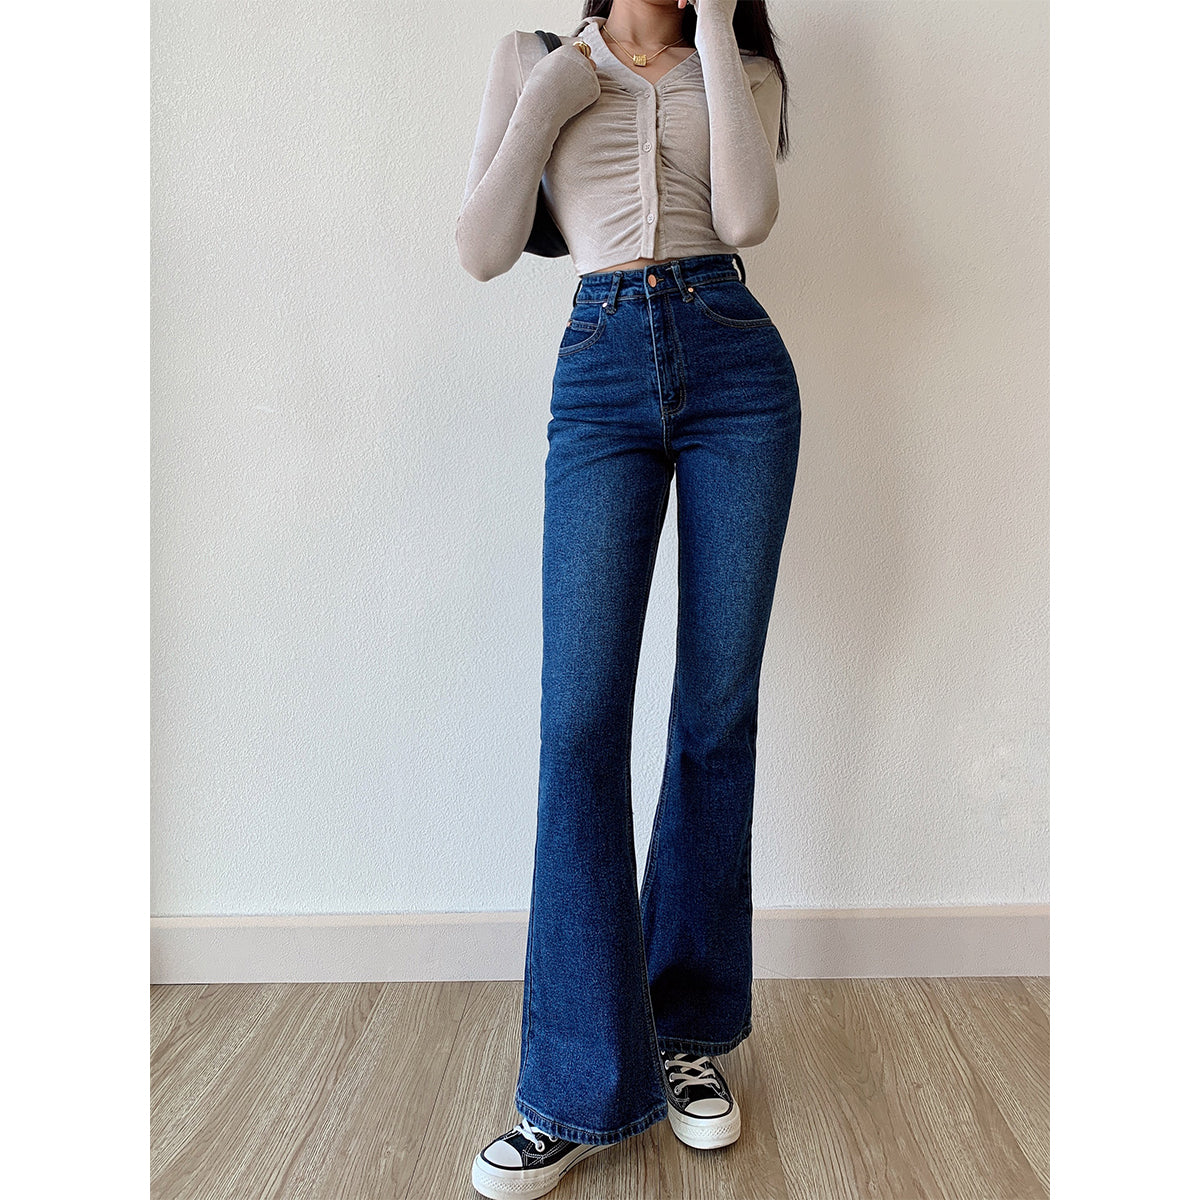 Washed High Waist Slim Flare Jeans